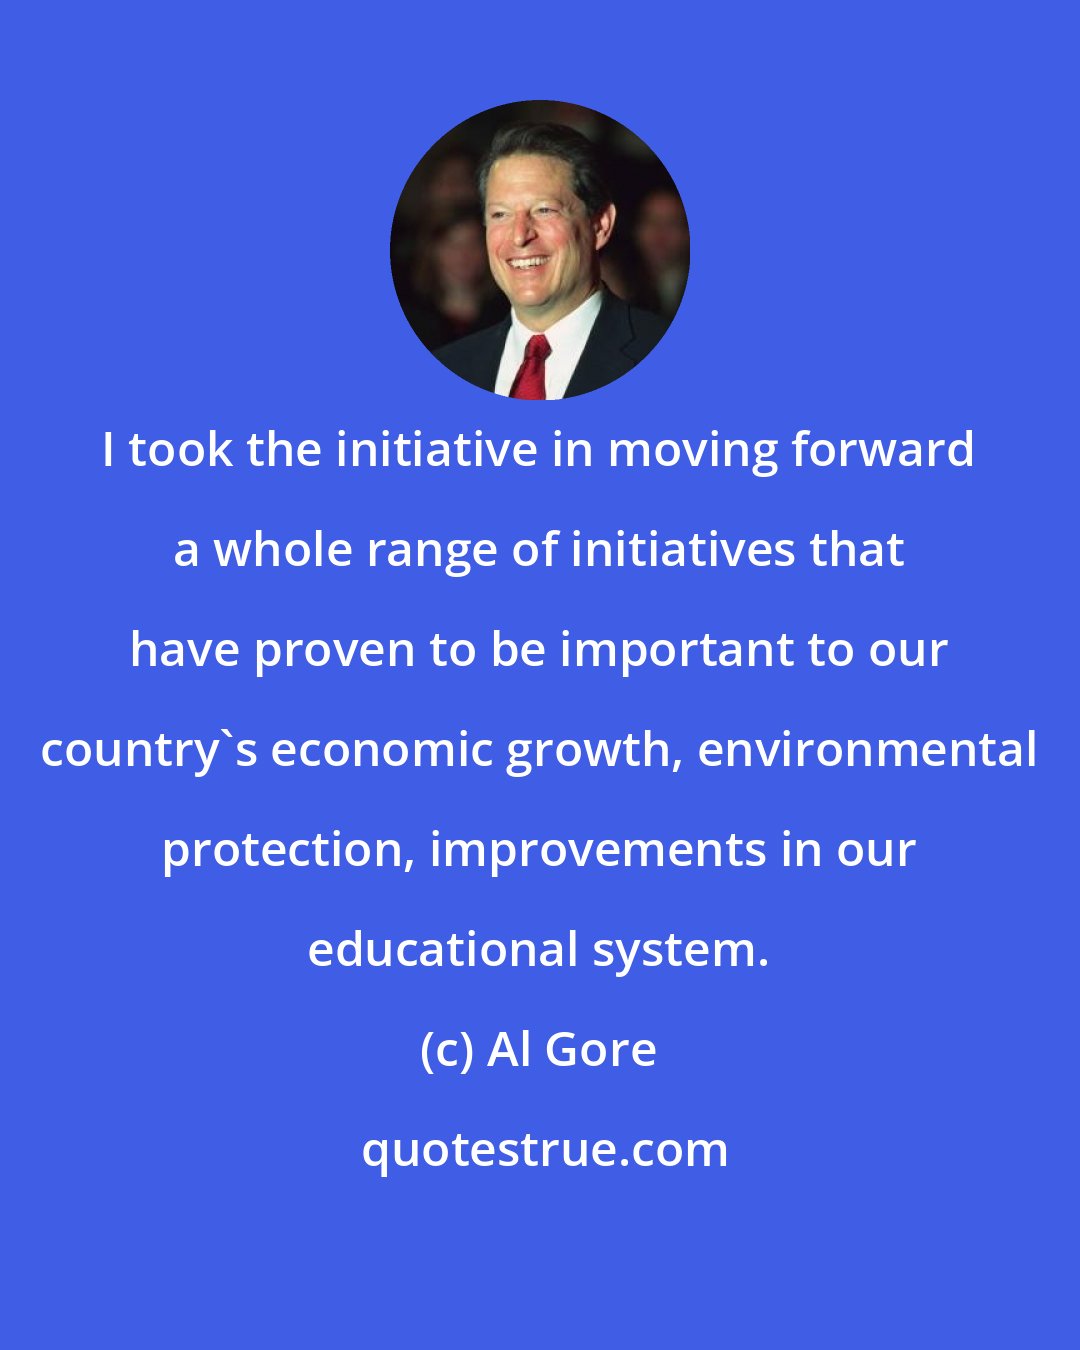 Al Gore: I took the initiative in moving forward a whole range of initiatives that have proven to be important to our country's economic growth, environmental protection, improvements in our educational system.